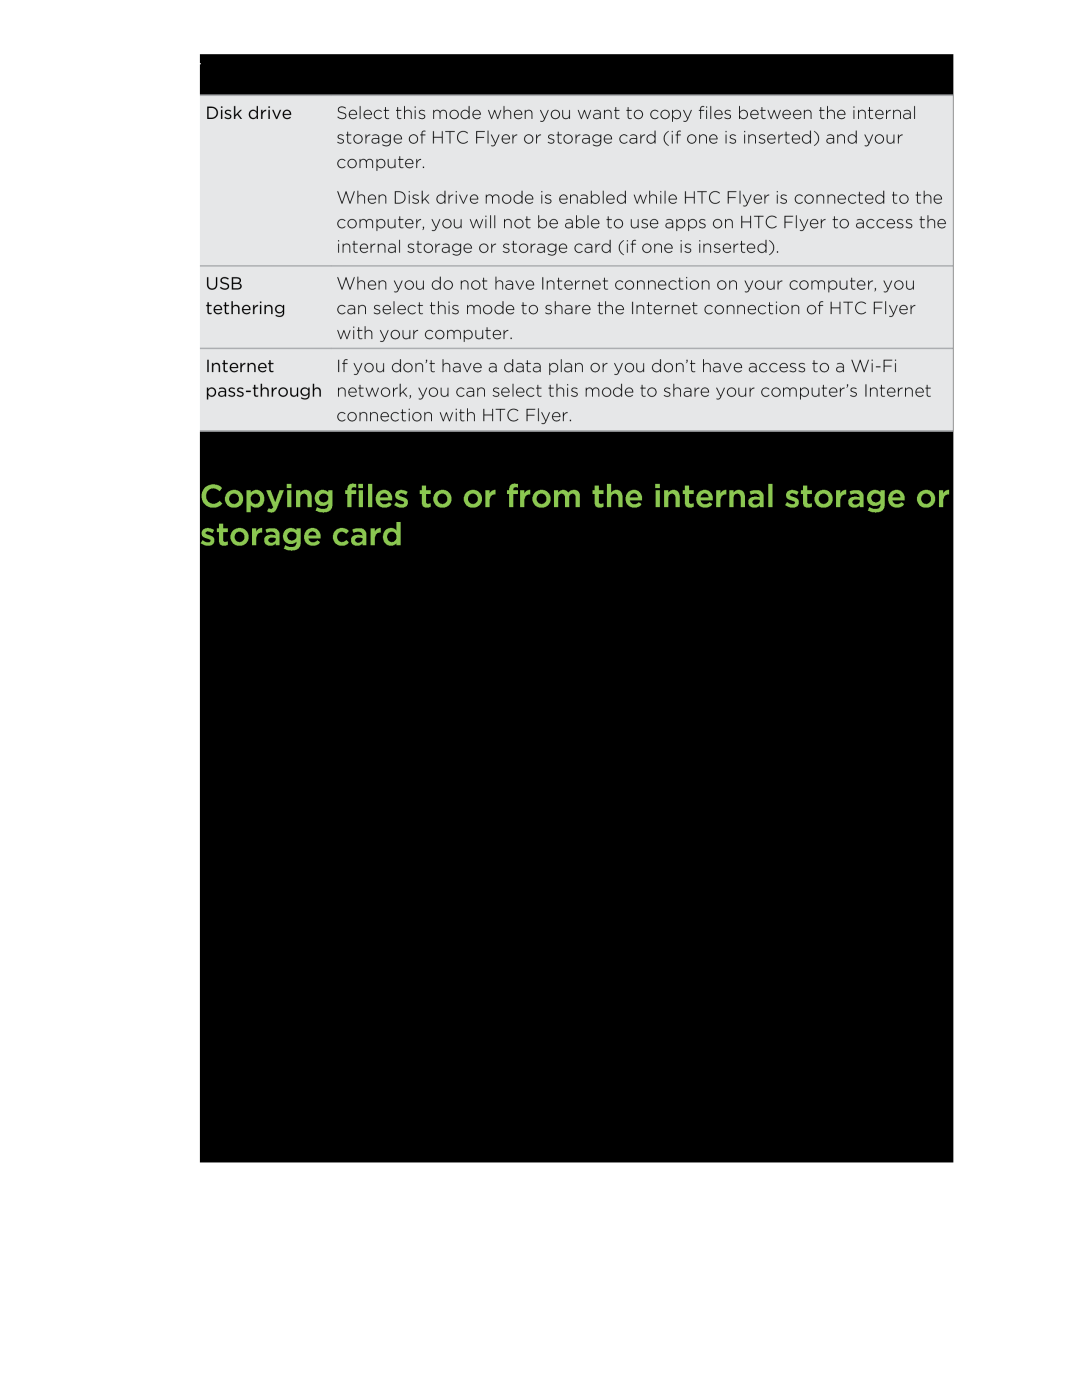 HTC HTCFlyerP512 manual Copying files to or from the internal storage or storage card 